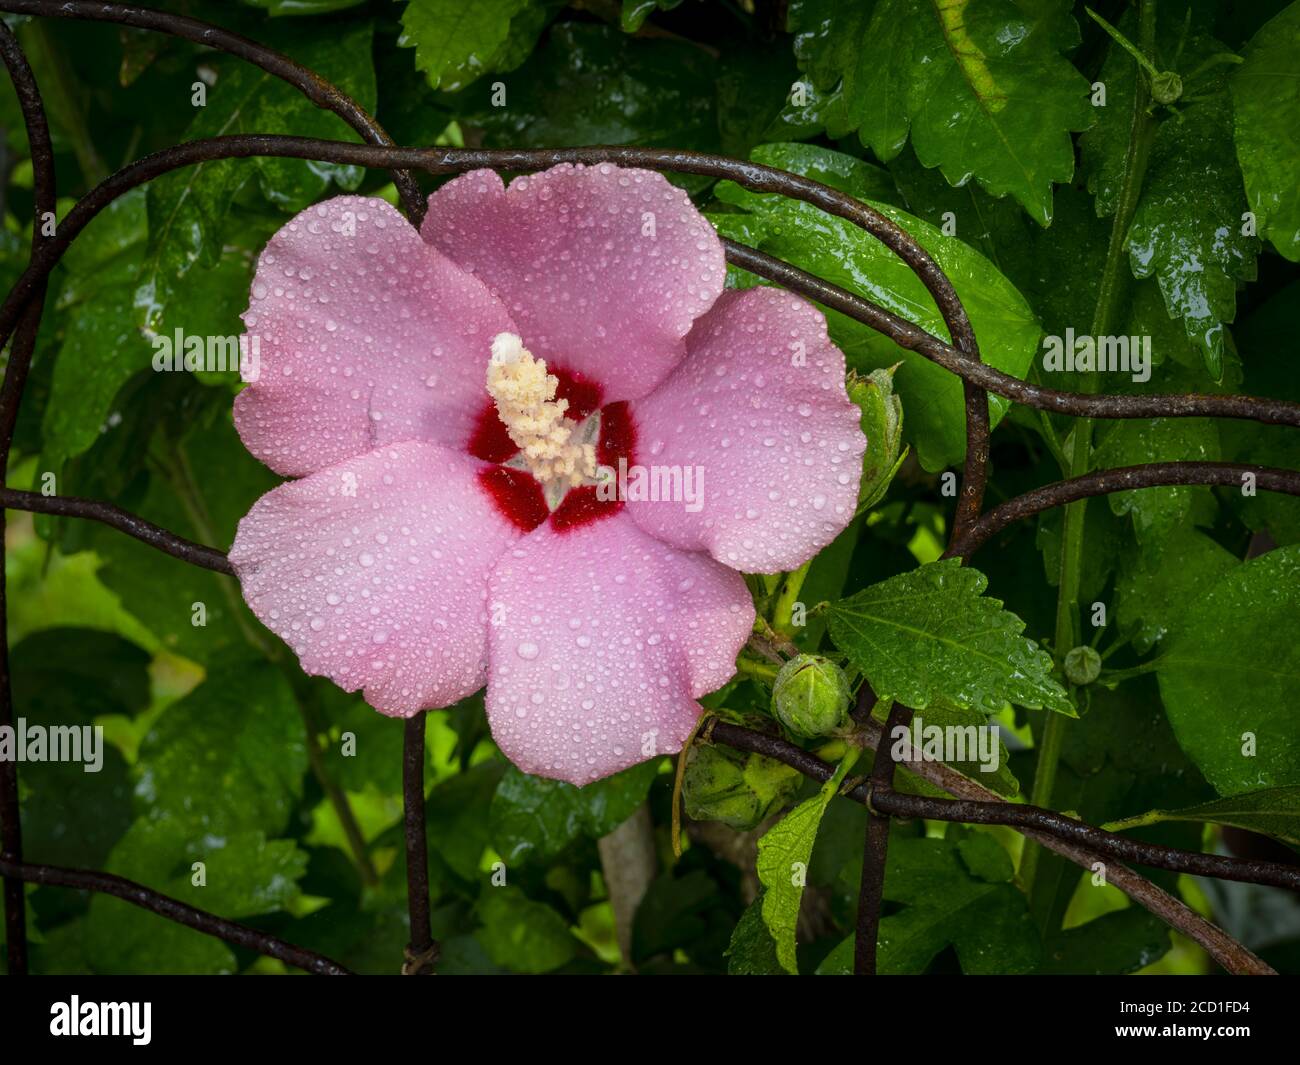 Pink rose of sharon flower with rain drops Stock Photo